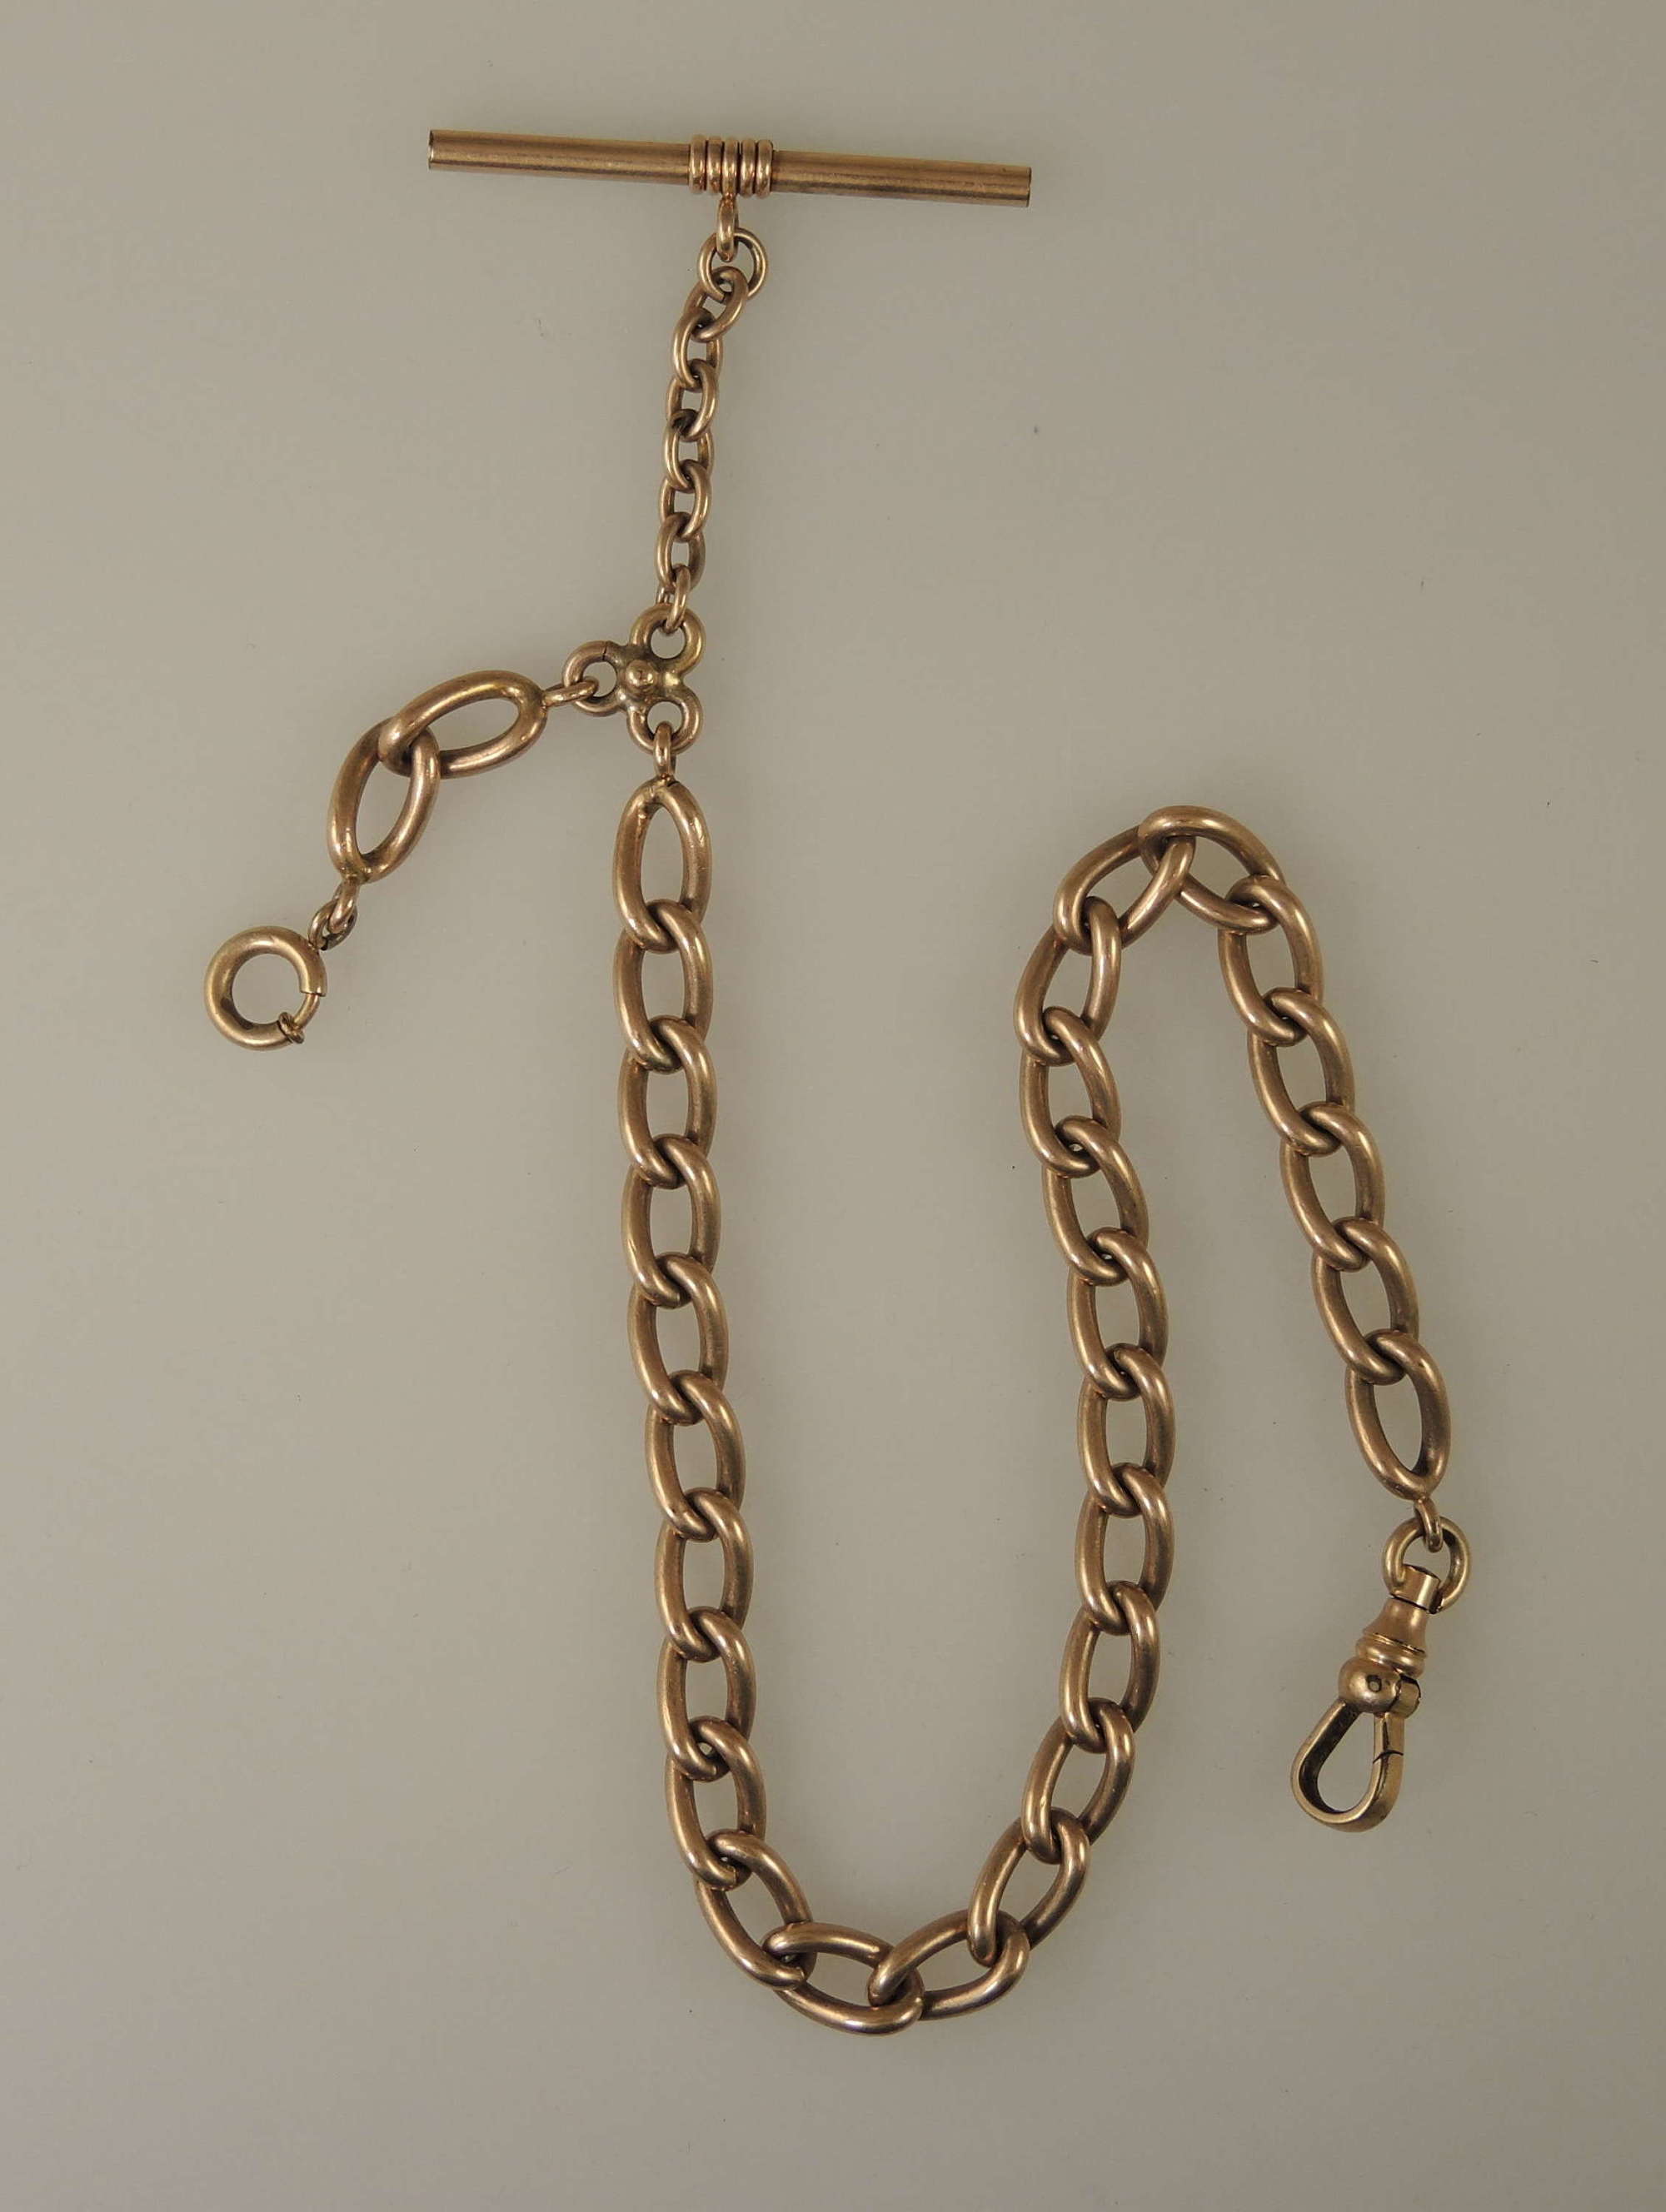 Good gold plated Victorian pocket watch chain c1890